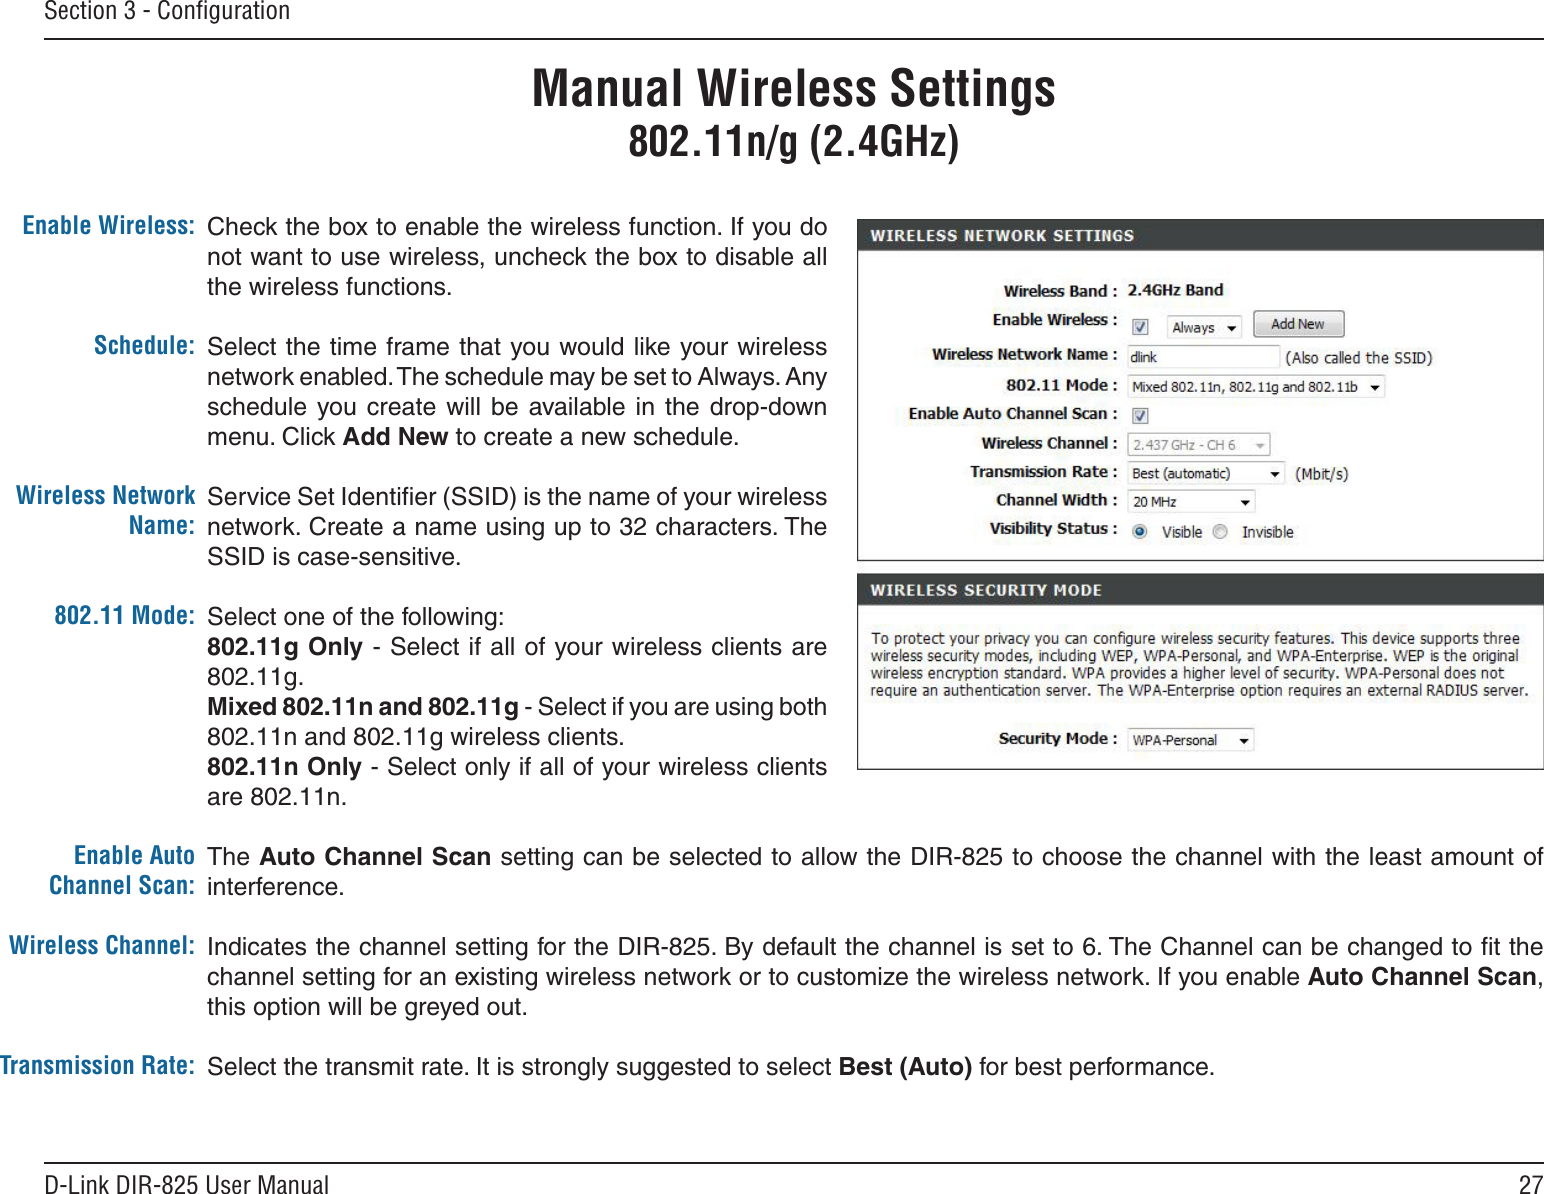 27D-Link DIR-825 User ManualSection 3 - ConﬁgurationCheck the box to enable the wireless function. If you do not want to use wireless, uncheck the box to disable all the wireless functions.Select the time frame that you would like your wireless network enabled. The schedule may be set to Always. Any schedule  you  create will  be  available  in the  drop-down menu. Click Add New to create a new schedule.Service Set Identiﬁer (SSID) is the name of your wireless network. Create a name using up to 32 characters. The SSID is case-sensitive.Select one of the following:802.11g Only - Select if all of your wireless clients are 802.11g.Mixed 802.11n and 802.11g - Select if you are using both 802.11n and 802.11g wireless clients.802.11n Only - Select only if all of your wireless clients are 802.11n.The Auto Channel Scan setting can be selected to allow the DIR-825 to choose the channel with the least amount of interference.Indicates the channel setting for the DIR-825. By default the channel is set to 6. The Channel can be changed to ﬁt the channel setting for an existing wireless network or to customize the wireless network. If you enable Auto Channel Scan, this option will be greyed out.Select the transmit rate. It is strongly suggested to select Best (Auto) for best performance.Enable Wireless:Schedule:Wireless Network Name:802.11 Mode:Enable Auto Channel Scan:Wireless Channel:Transmission Rate:Manual Wireless Settings802.11n/g (2.4GHz)